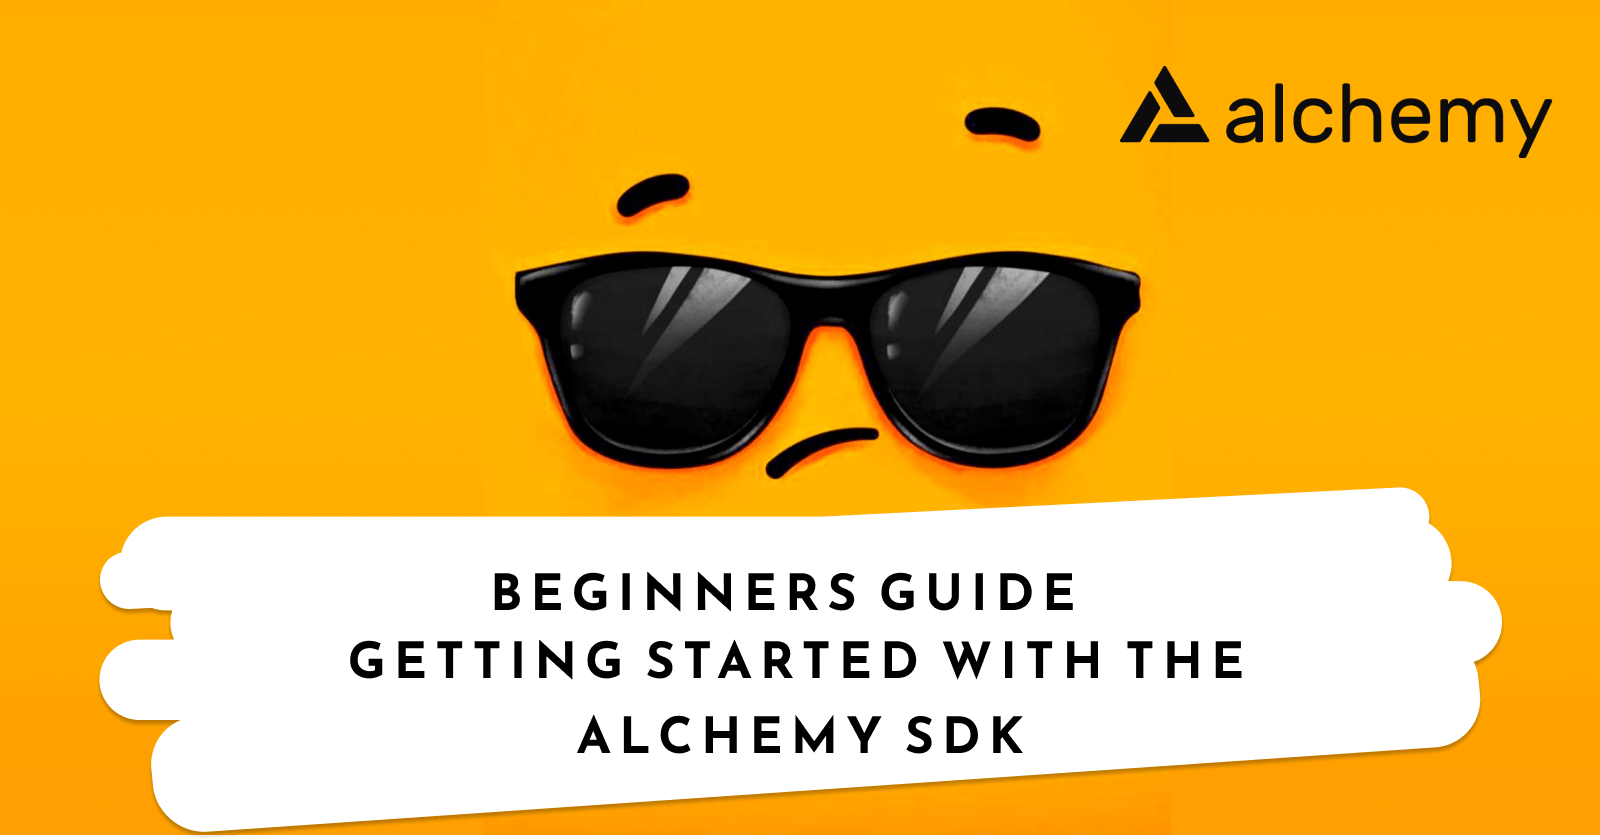 Getting Started with the Alchemy SDK